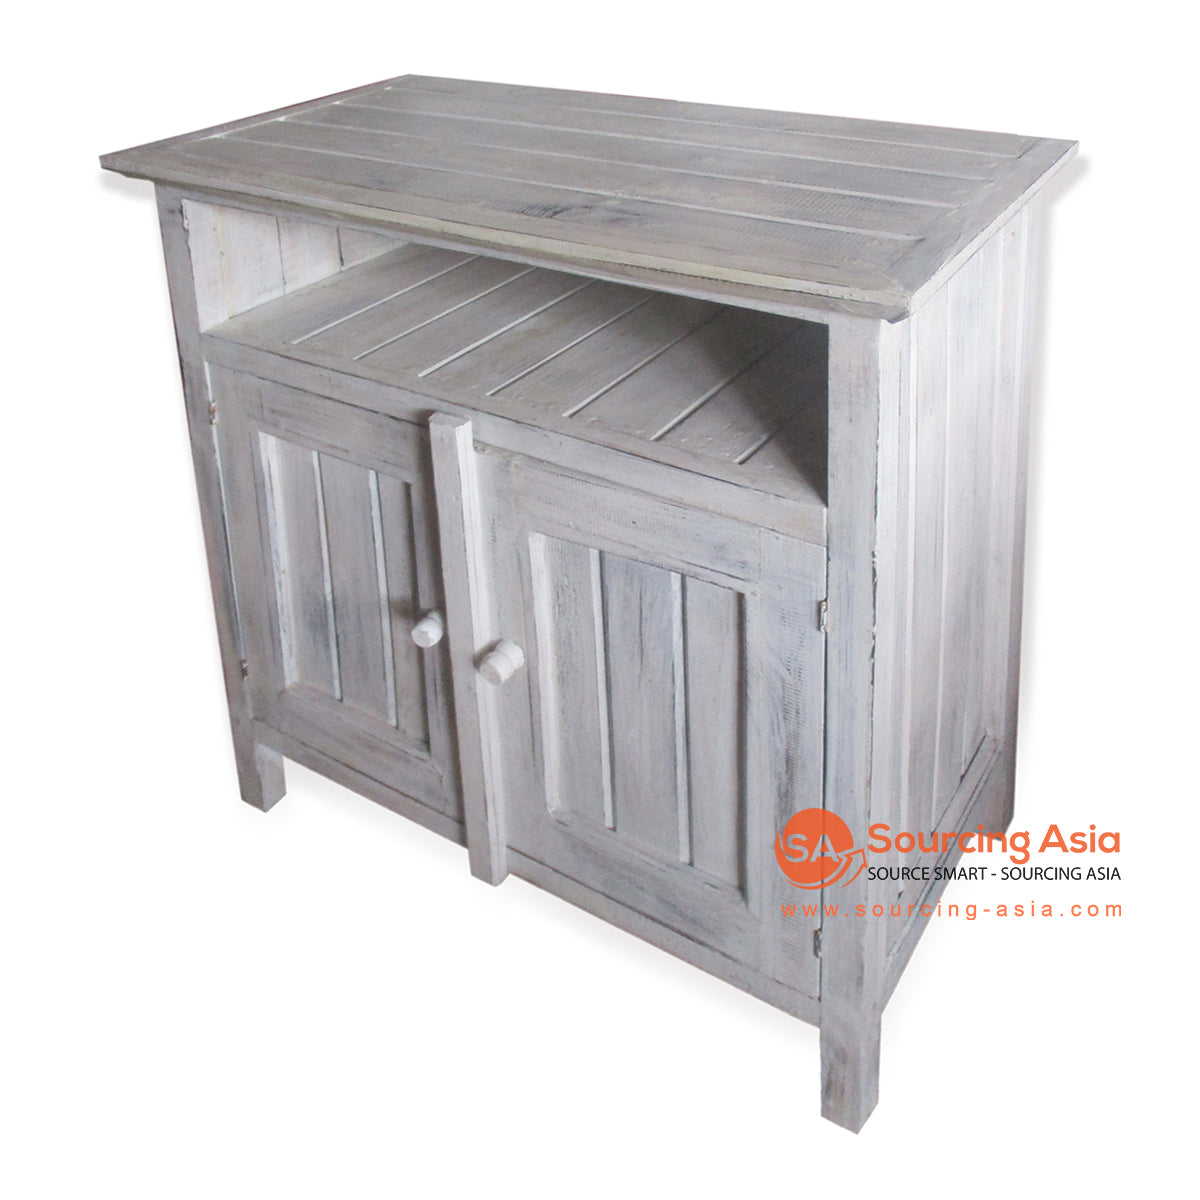 THE028-3 WHITE WASH WOODEN TV TABLE WITH A SHELF AND TWO CABINETS